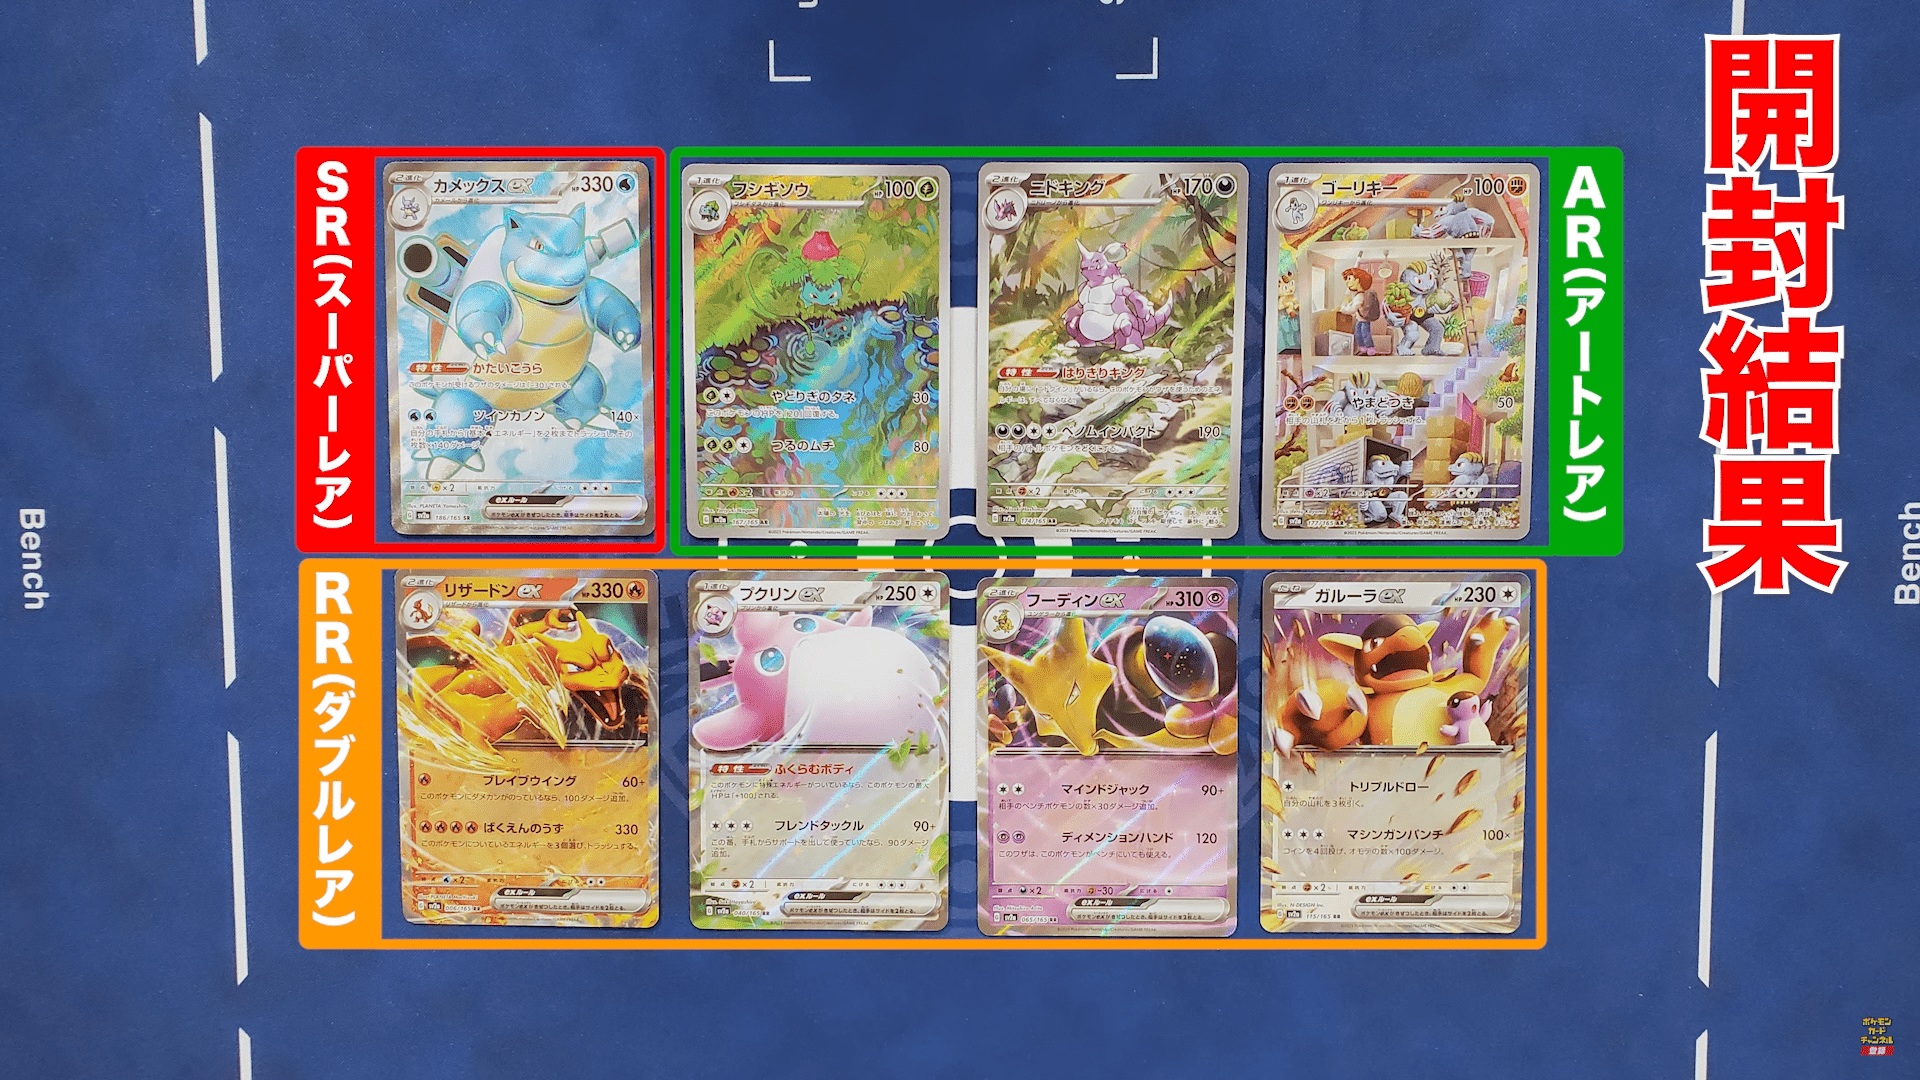 Pokémon 151 set revealed! Can't wait to see what the illustration